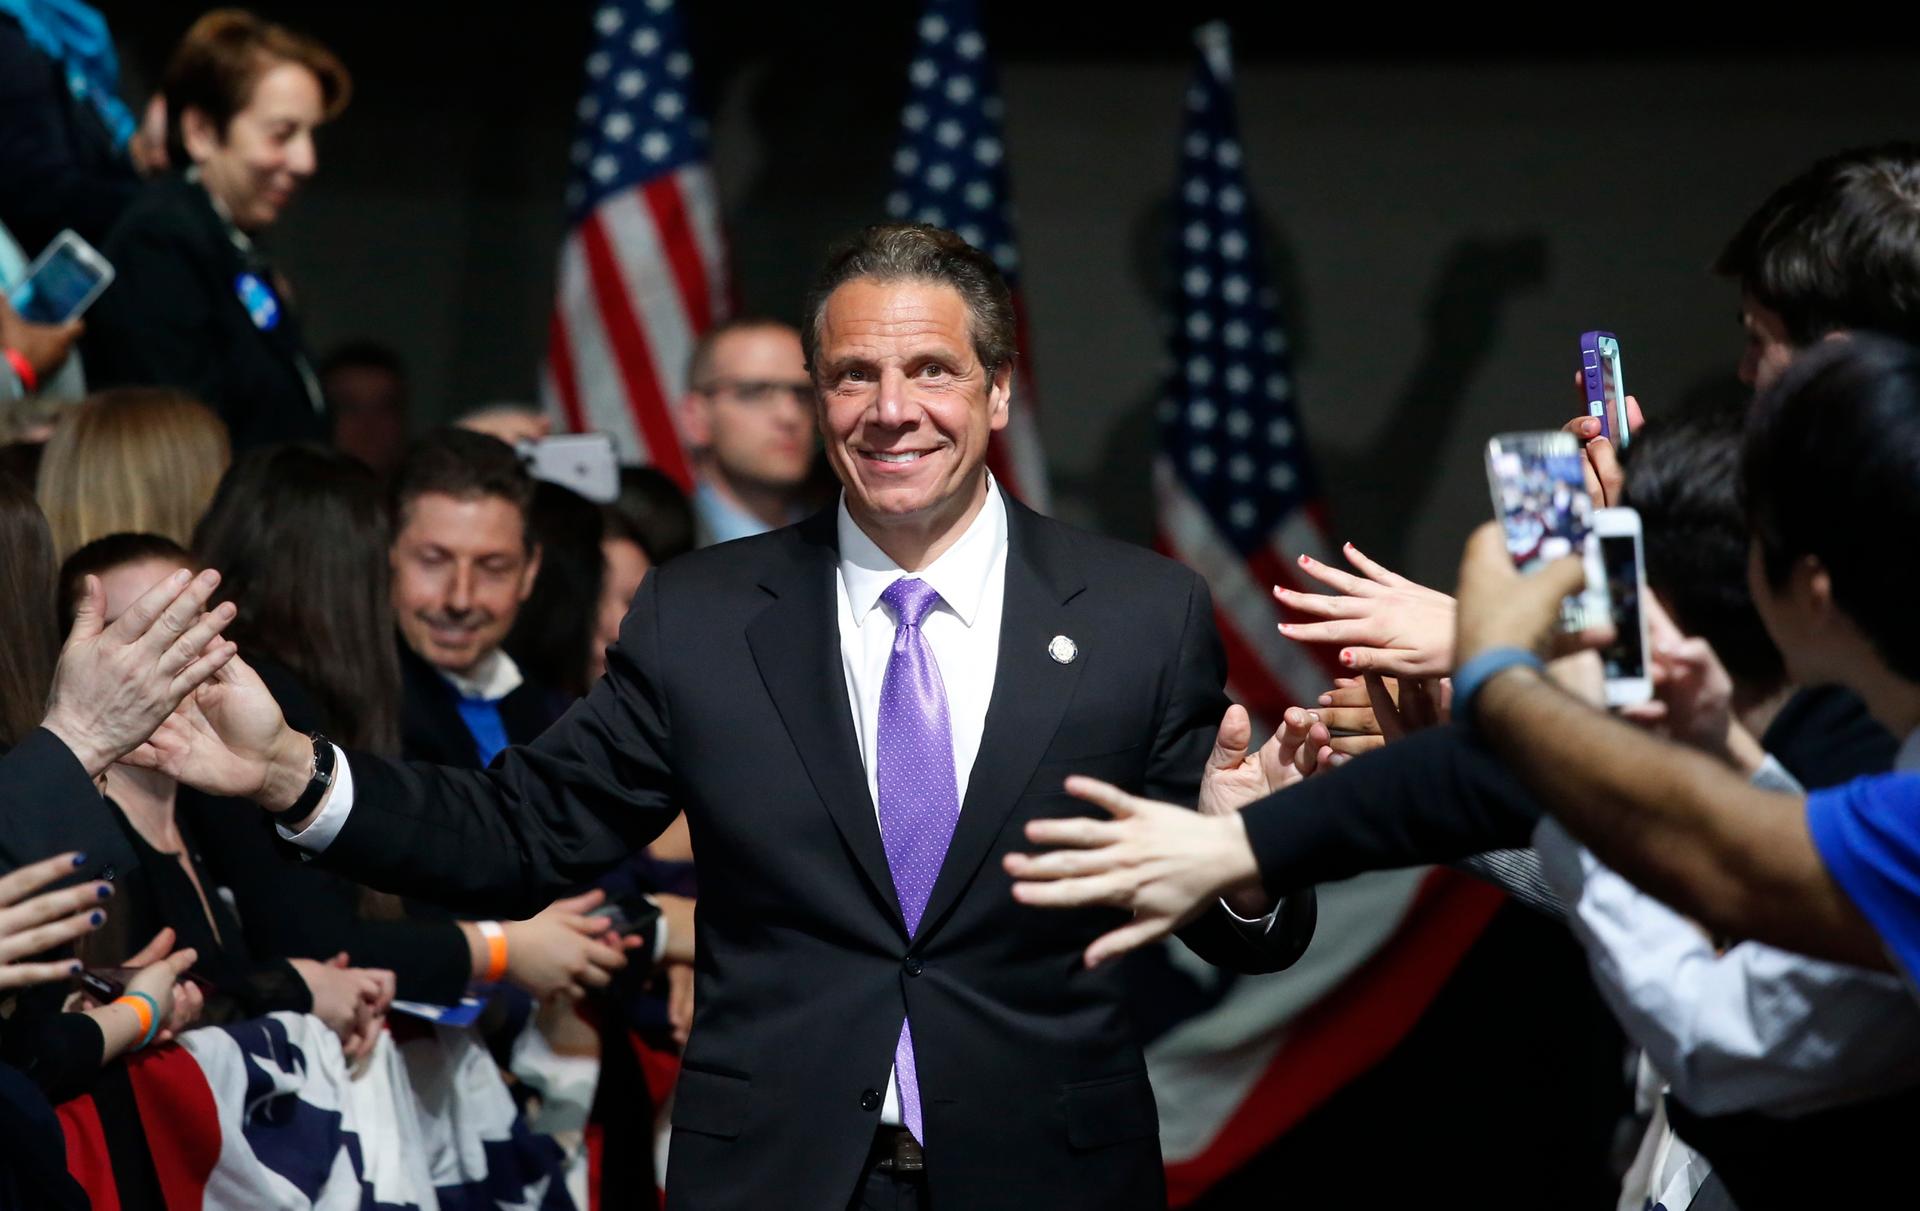 New York State Governor Andrew Cuomo enters the room before the arrival of Democratic U.S. presidential candidate Hillary Clinton at her New York presidential primary night rally in the Manhattan borough of New York City